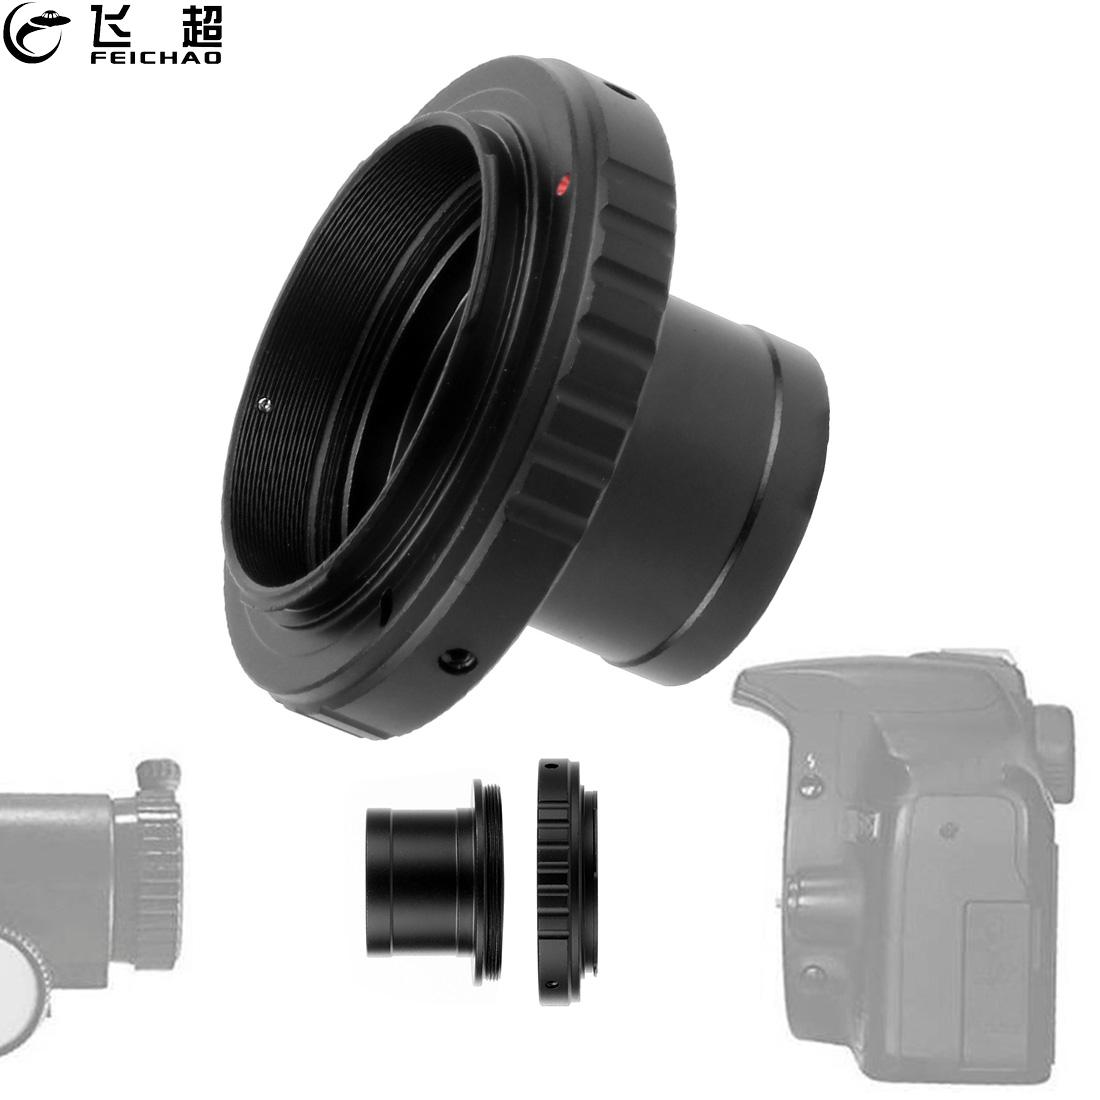 Lens Adapter 1.25 Inch T Ring Lens Mount Set DSLR Camera Accessory for Canon EOS Nikon Olympus Sony Pentax Telescope Microscope